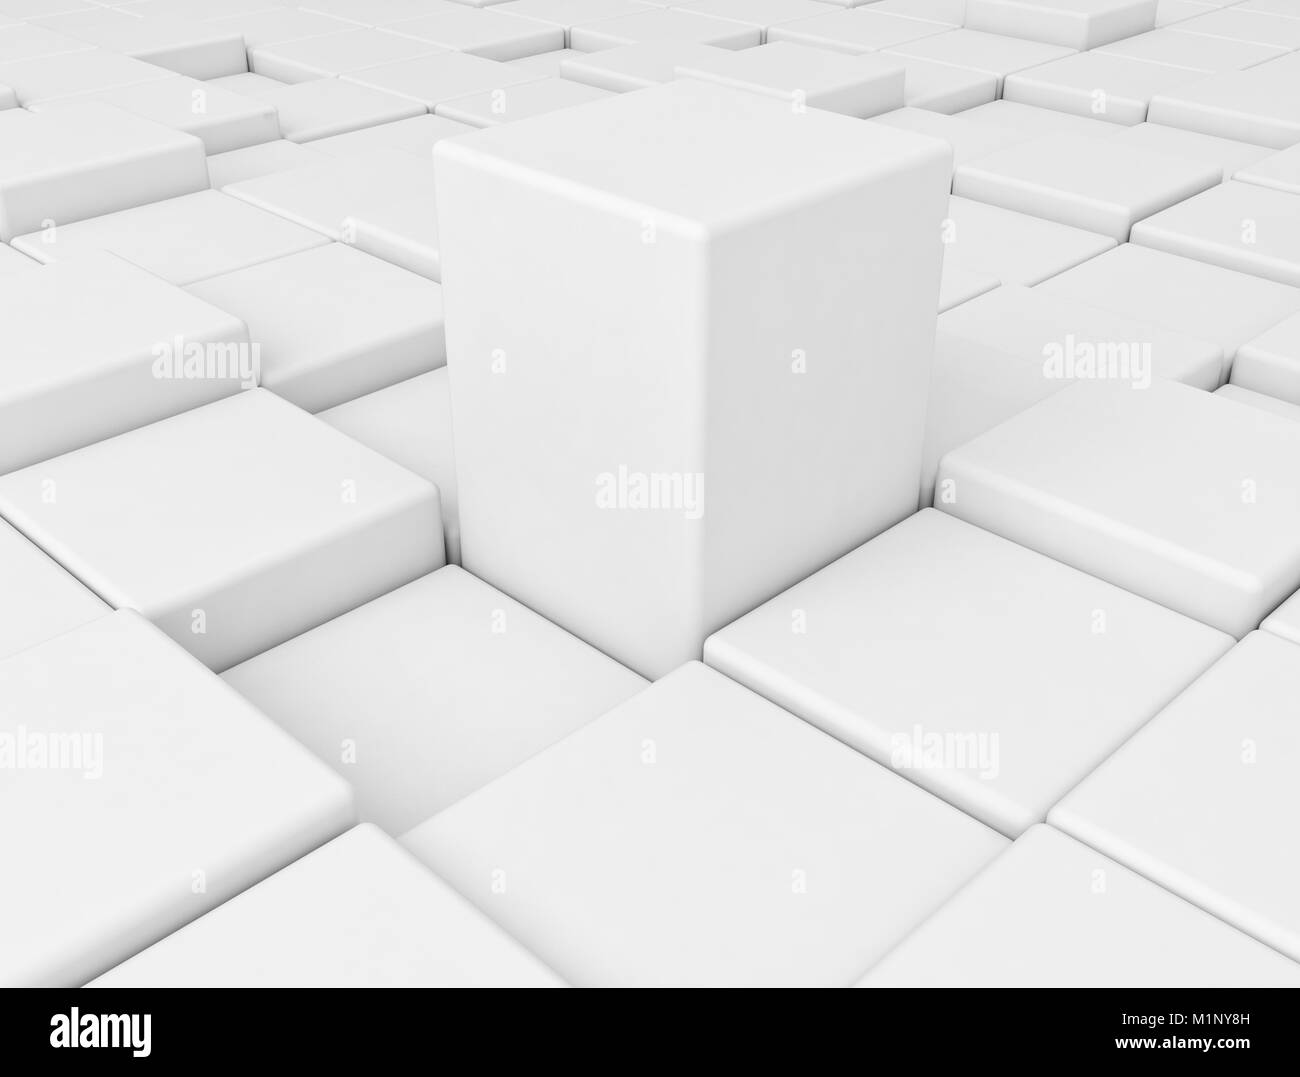 Abstract white blocks or cubes close up image Stock Photo